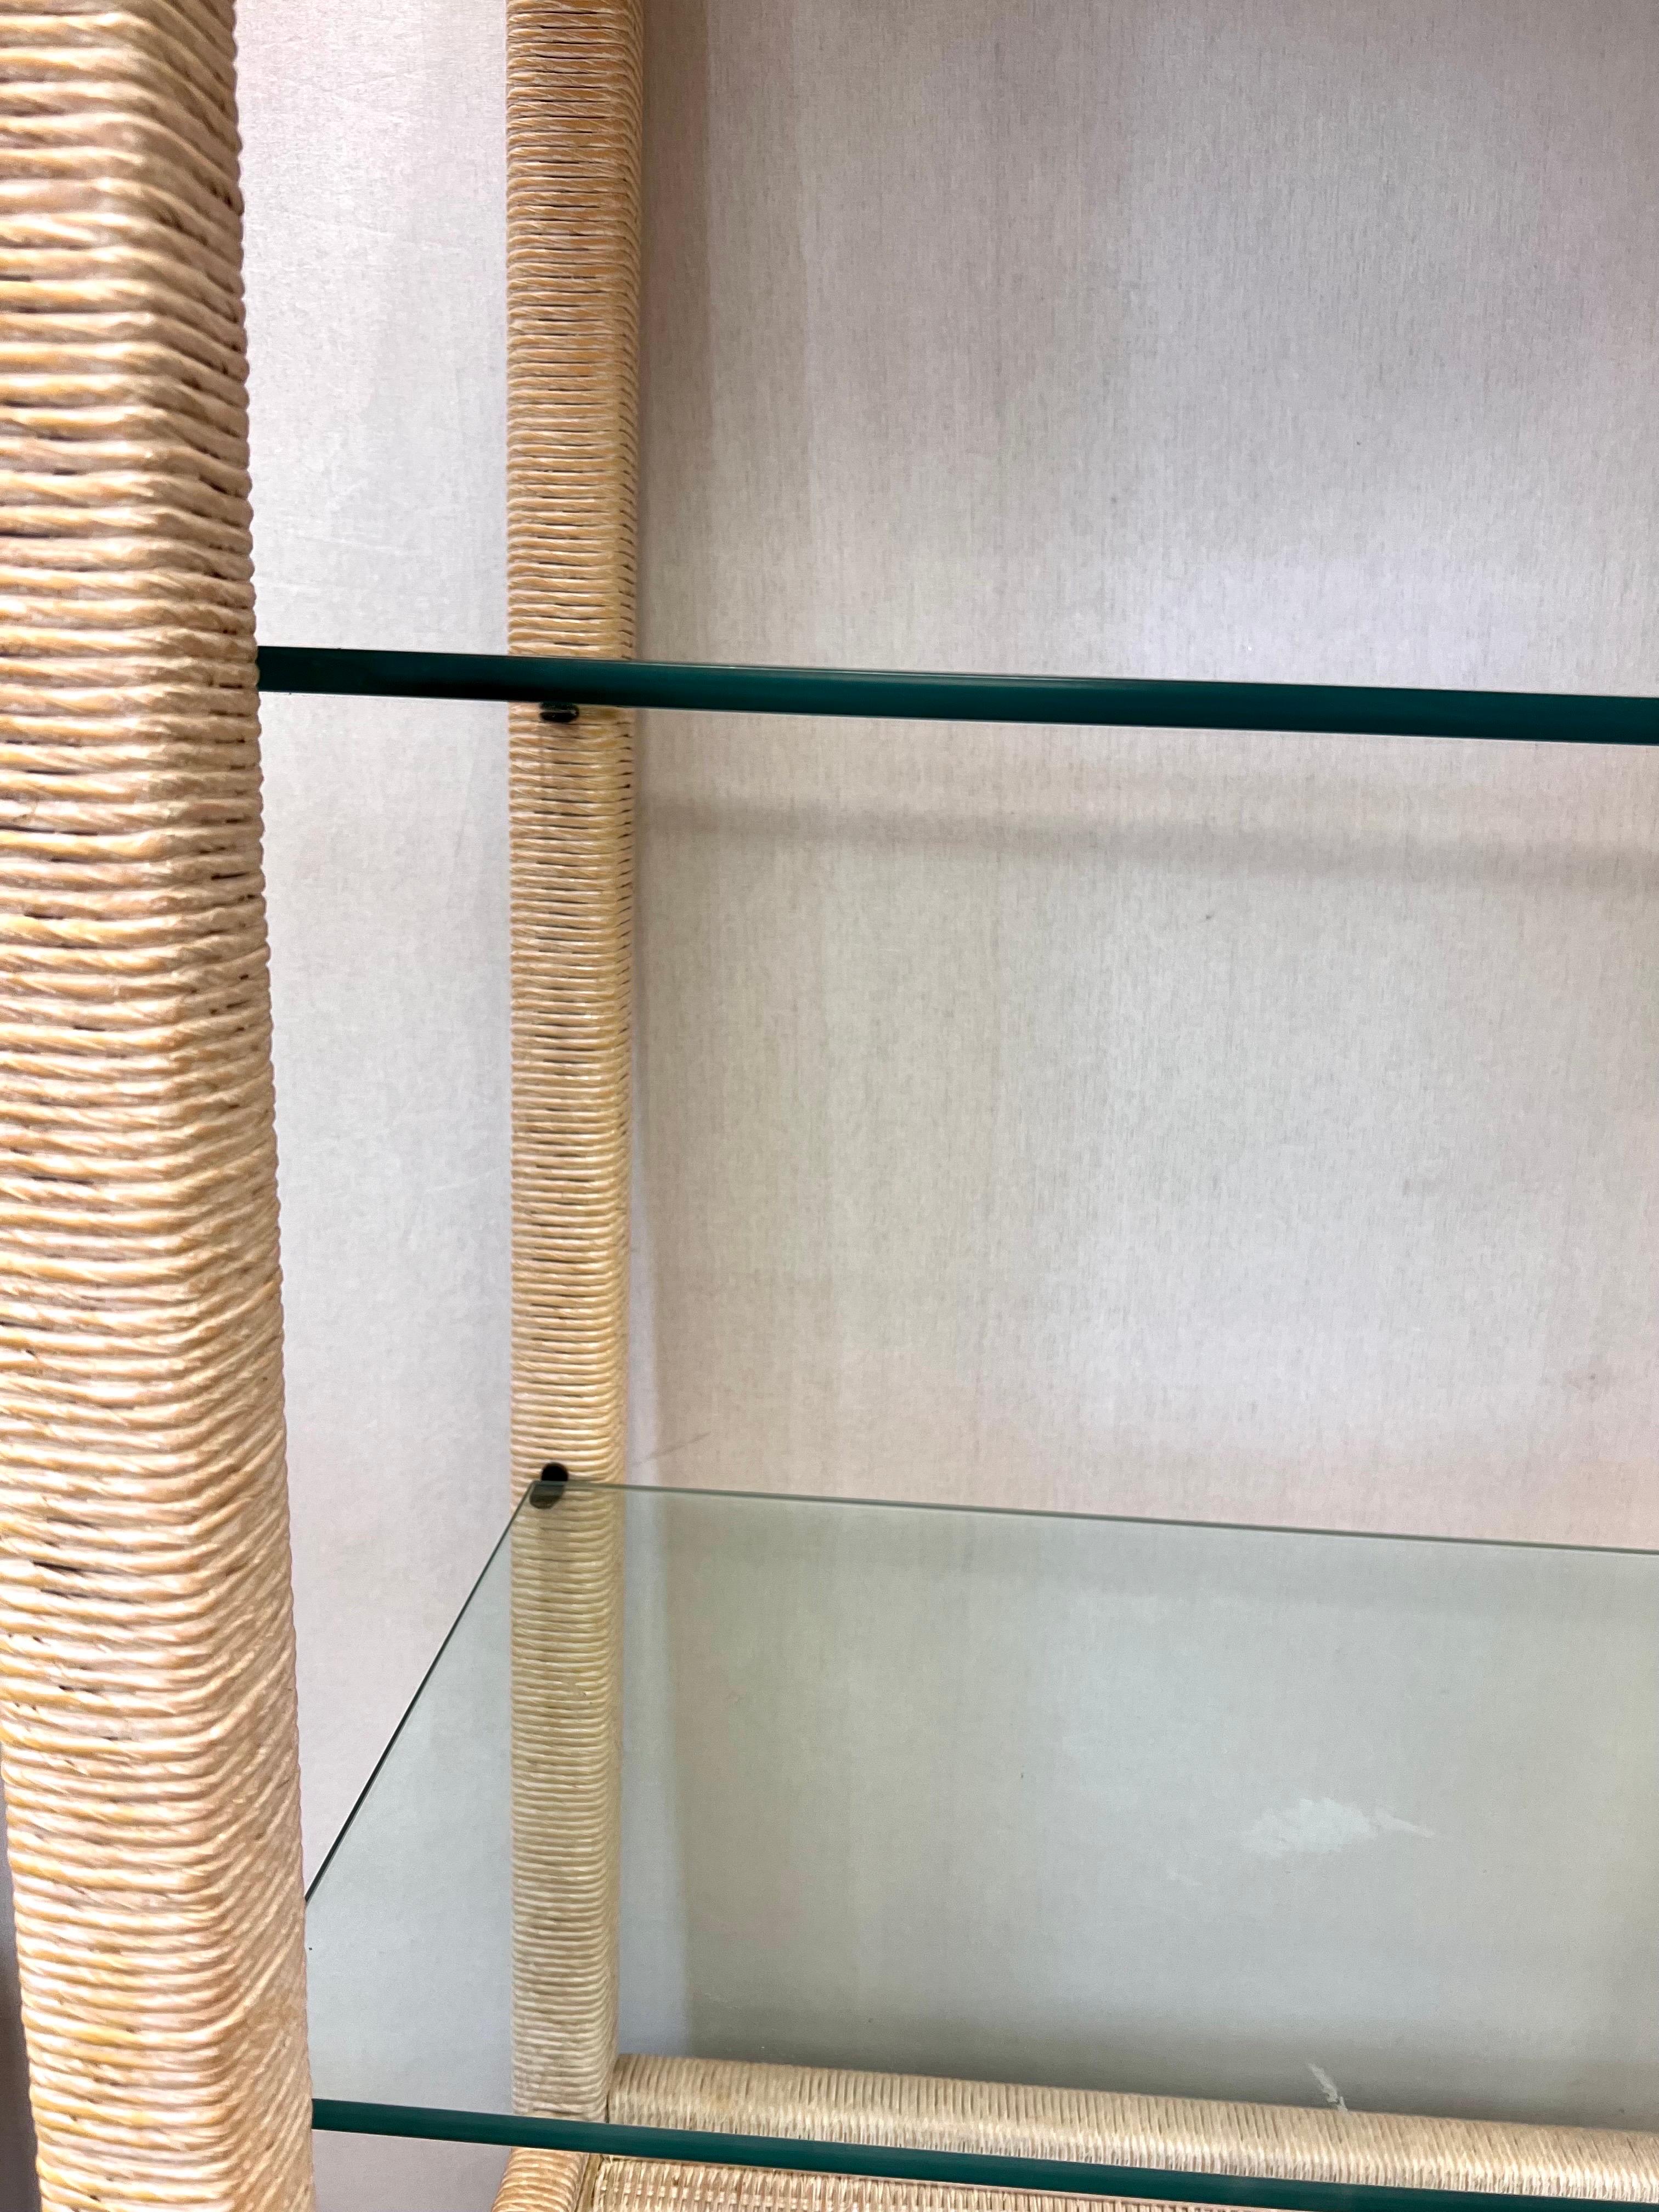 Henry Link wicker wrapped bookcase etagere with a whitewashed finish. Top has glass shelves. Bottom part has three drawers.
See our other listings for two more etageres.